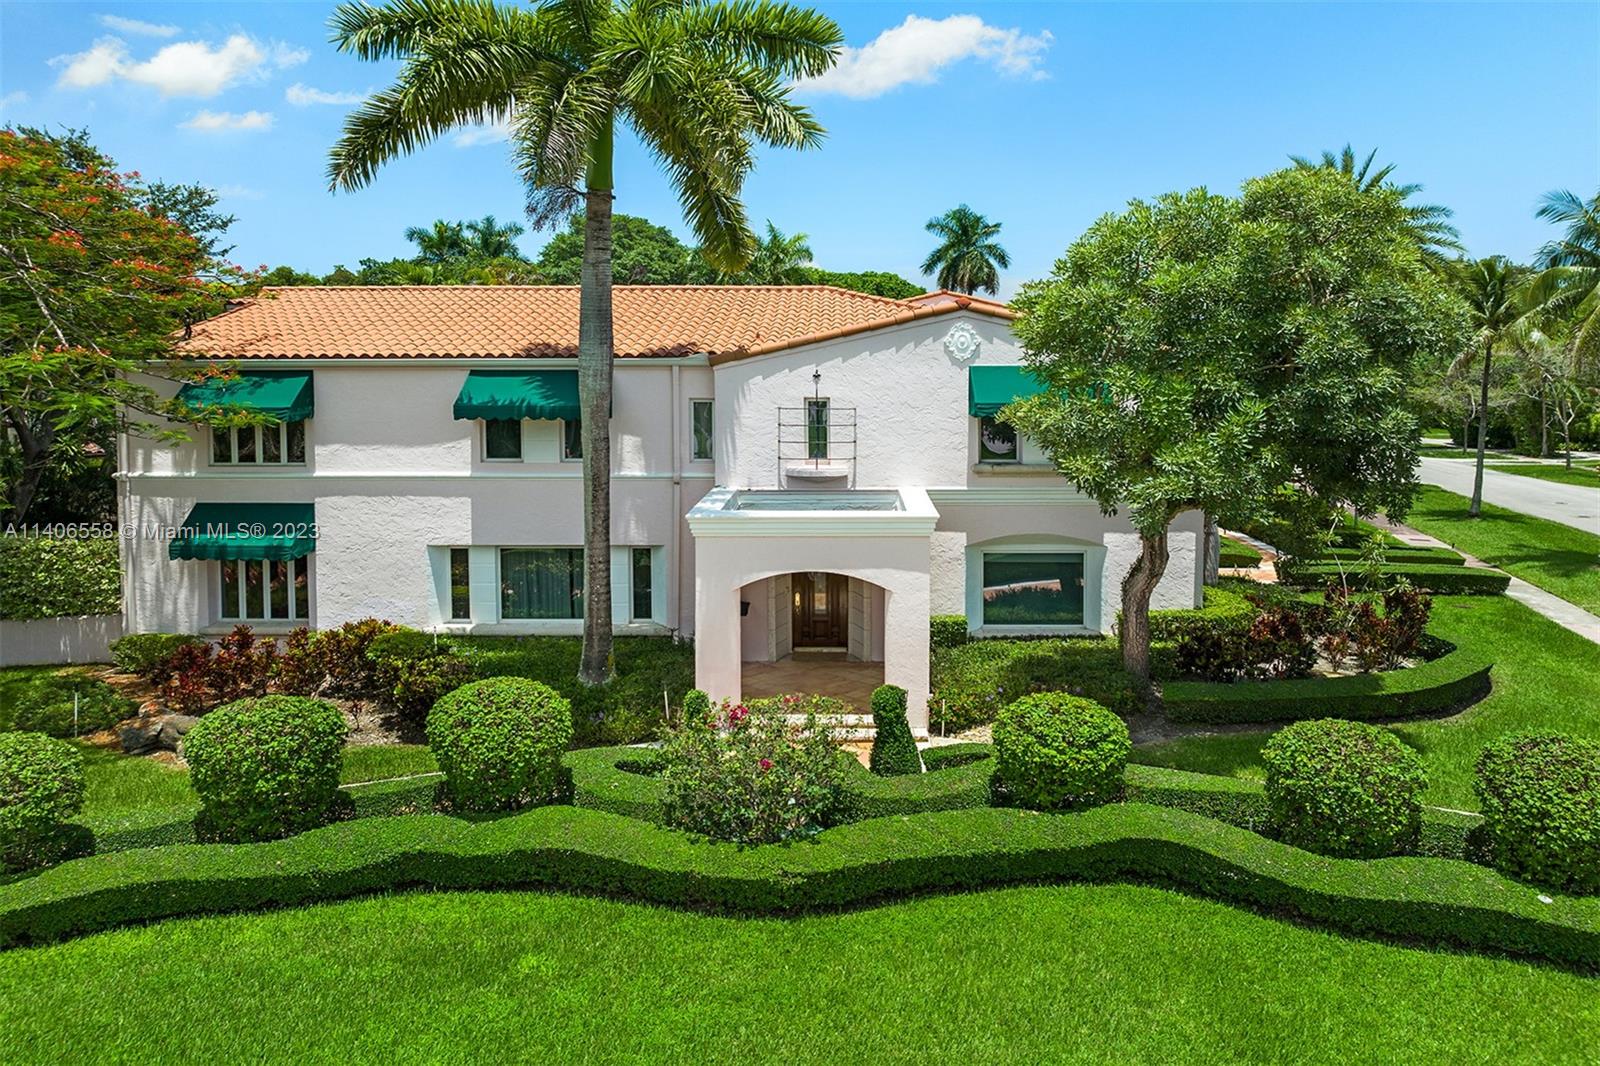 Exquisite and impressive 12,327 SF luxury estate with 7 bedrooms, 8  bathrooms and 2 half-bathrooms, on a 31,529 SF lot in Coral Gables. A grand foyer leads to an open layout with sizable rooms and custom architectural details, two formal dining rooms, and a gourmet kitchen with floor-to-ceiling cabinetry,  large center island, pantry, and top-of-the-line appliances. Includes a spacious primary bedroom suite, well-appointed office/library, game room, and elevator. Beautiful arched French windows/doors open to stunning outdoor areas with tall palm trees, manicured grounds, and a large pool with a brand new heater. Ample parking with a 4-car garage and driveway; new roof and AC units in 2019. Within close proximity to fine dining, high-end shopping and entertainment venues.